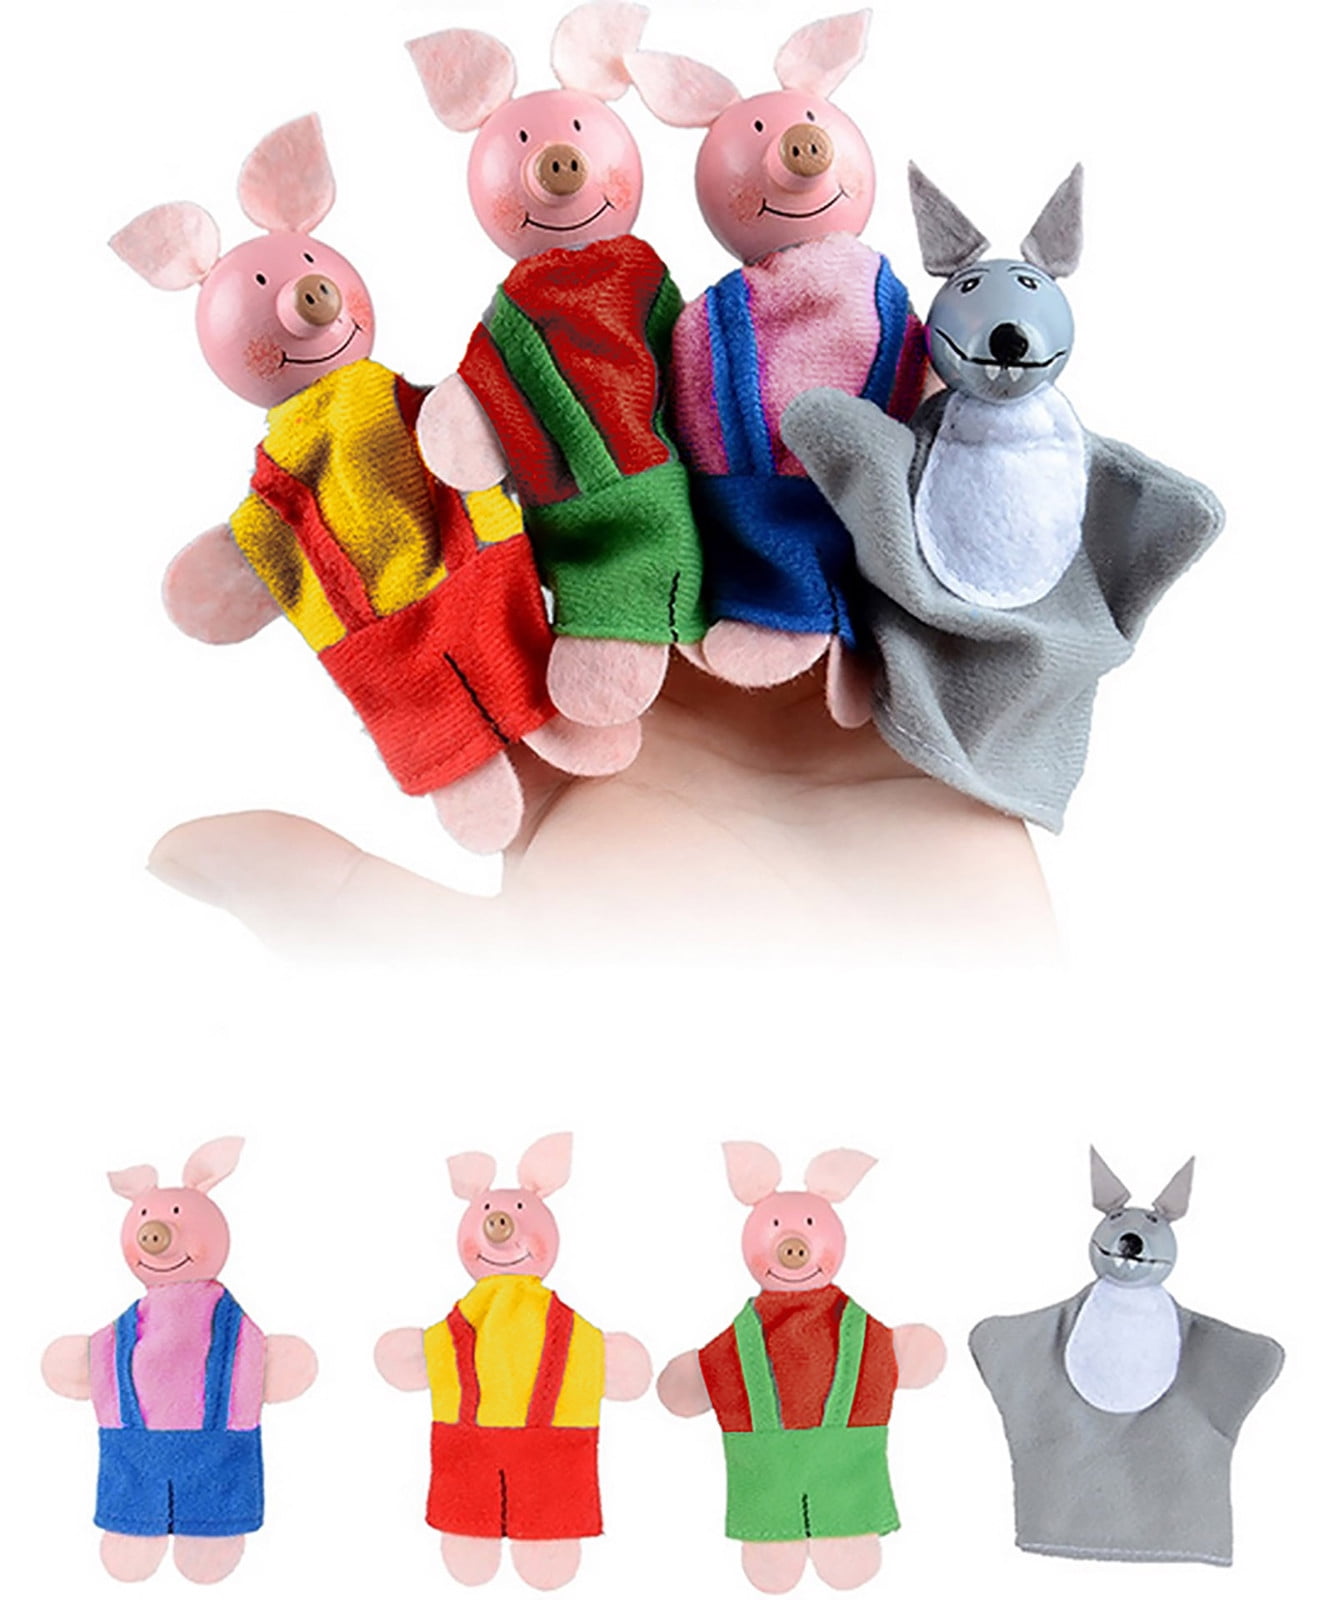 4 Pcs/set Three Little Pigs Finger Puppets Wooden Headed Baby Educational Toy YR 